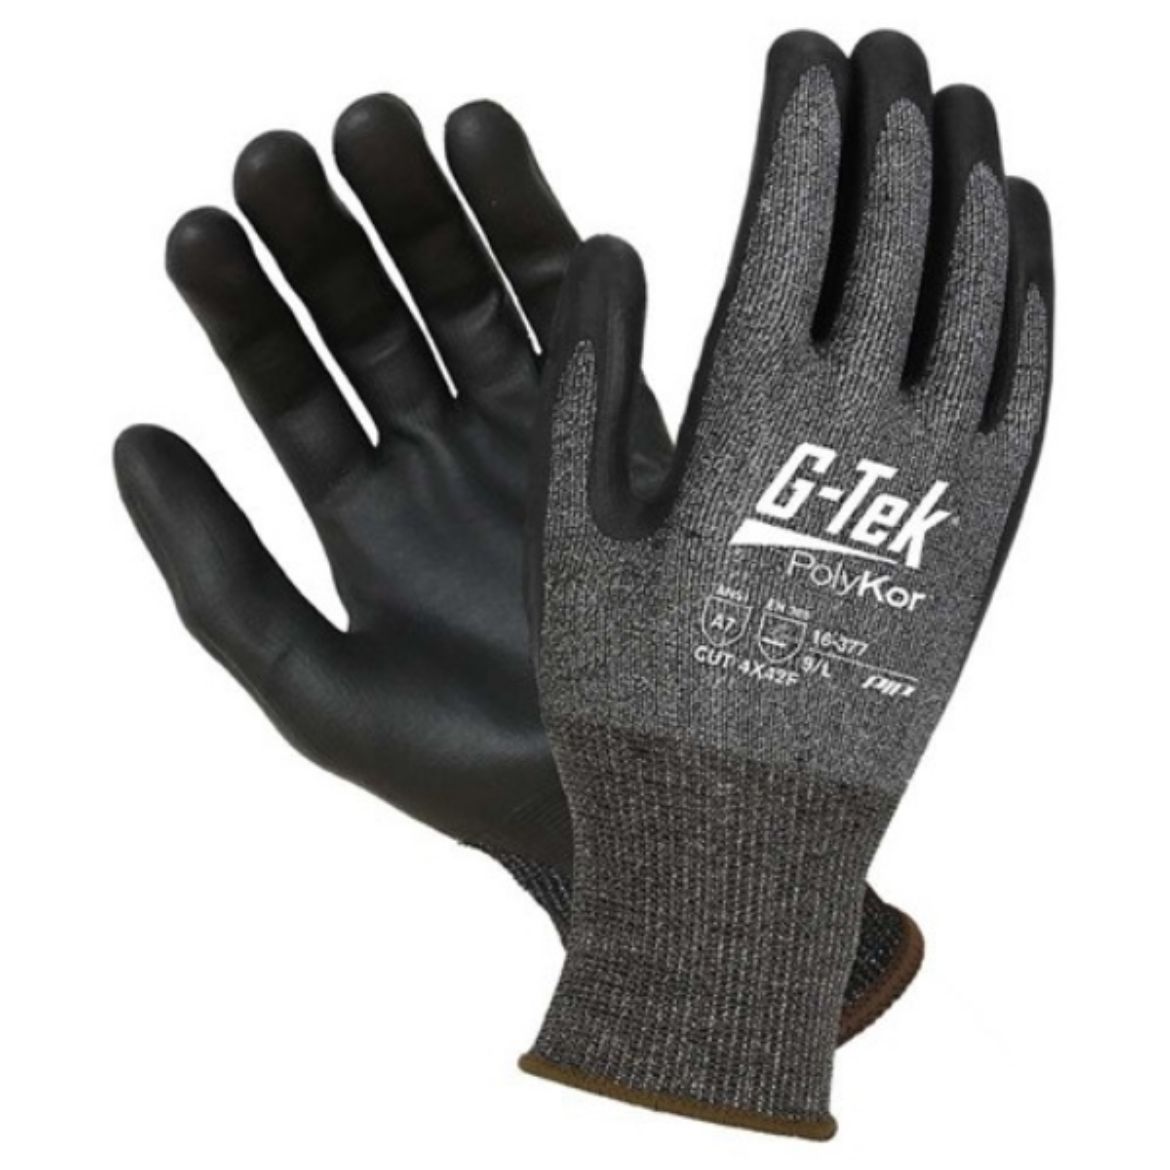 Picture of G-TEK POLYKOR X7 PLATINUM CUT F+ GLOVES. AVAILABLE IN SIZES 7 - 11.